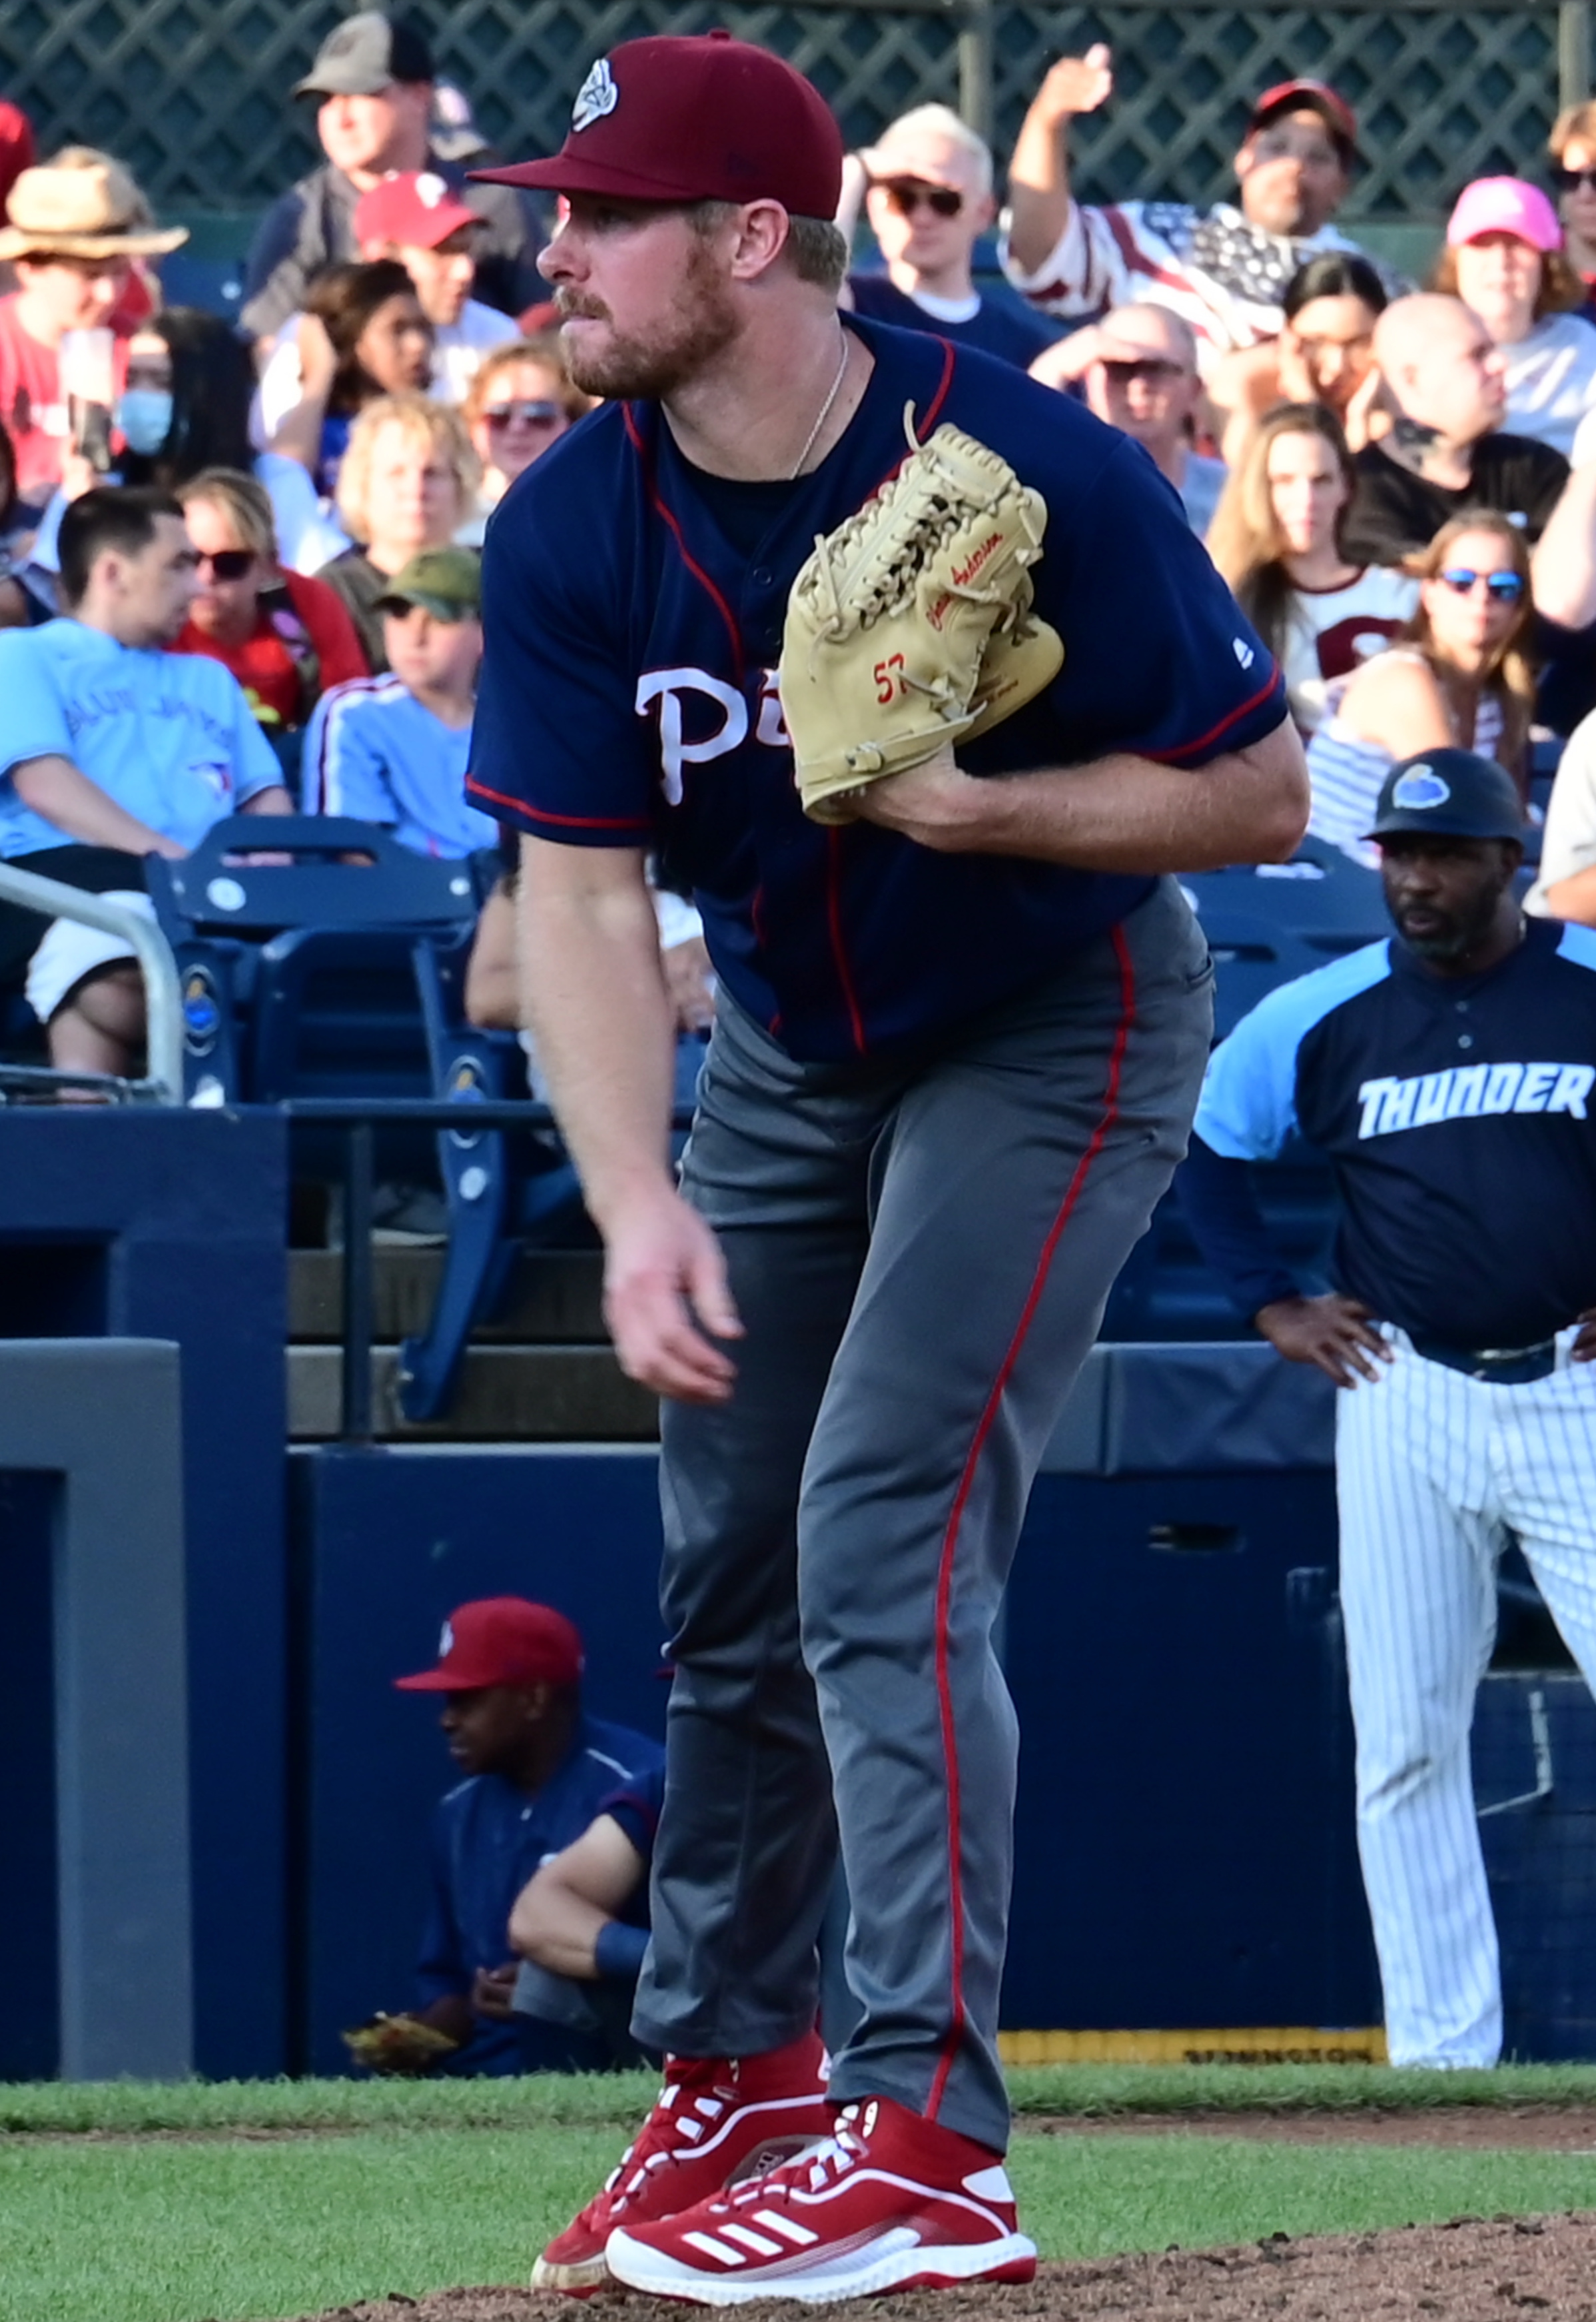 File:Chase Anderson Pitching For Lehigh Valley Iron Pigs (cropped